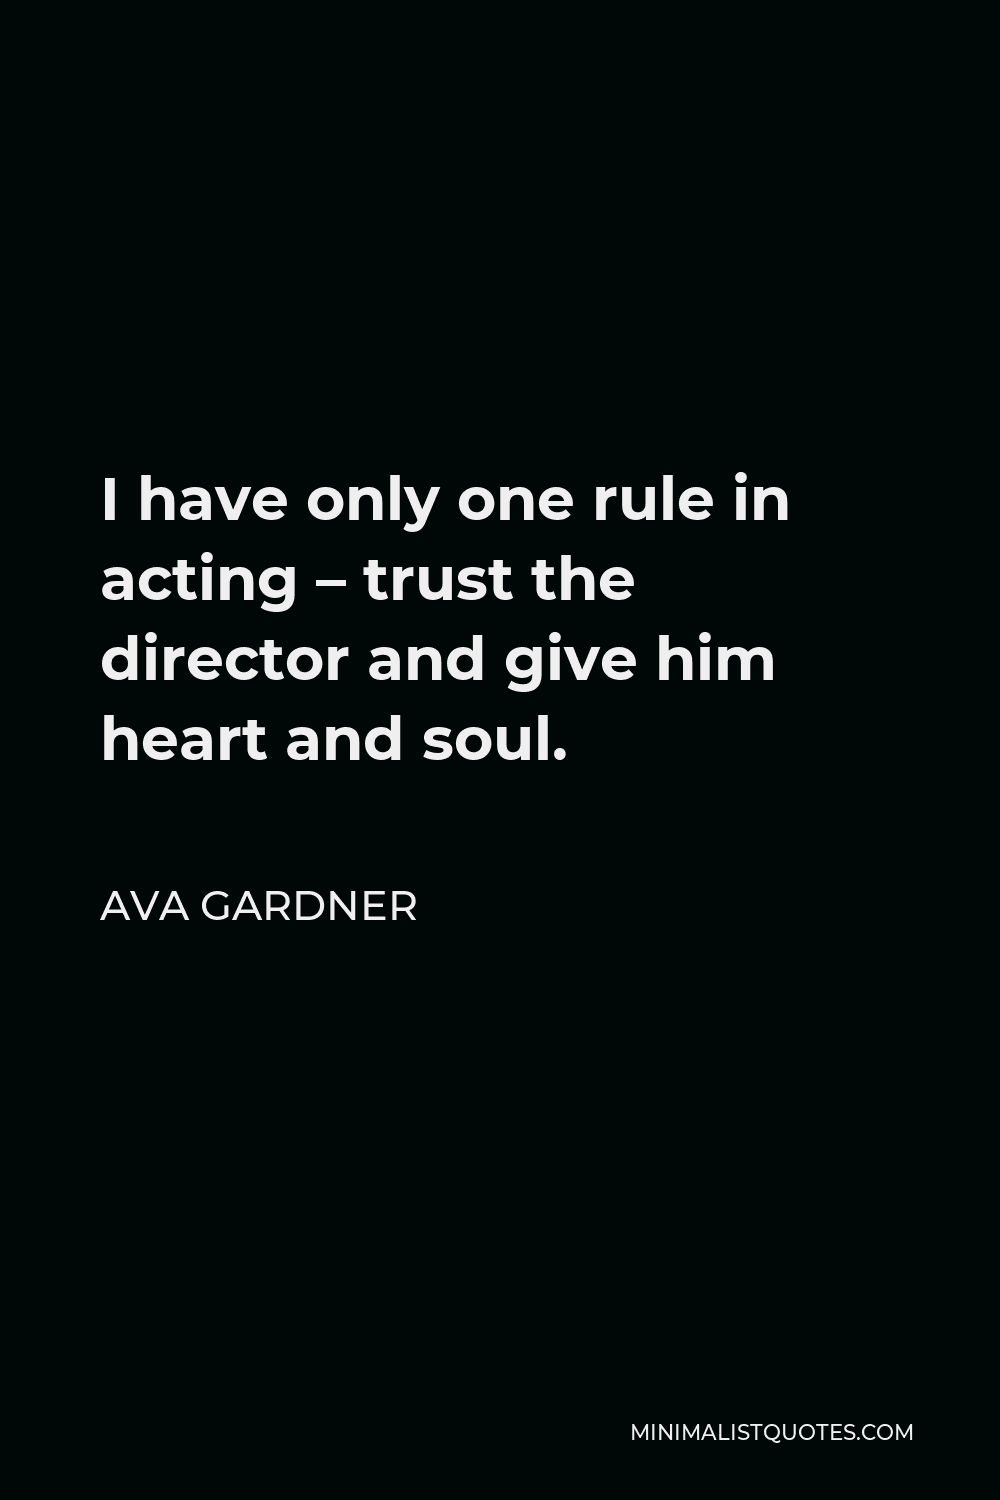 Ava Gardner Quote - I have only one rule in acting – trust the director and give him heart and soul.